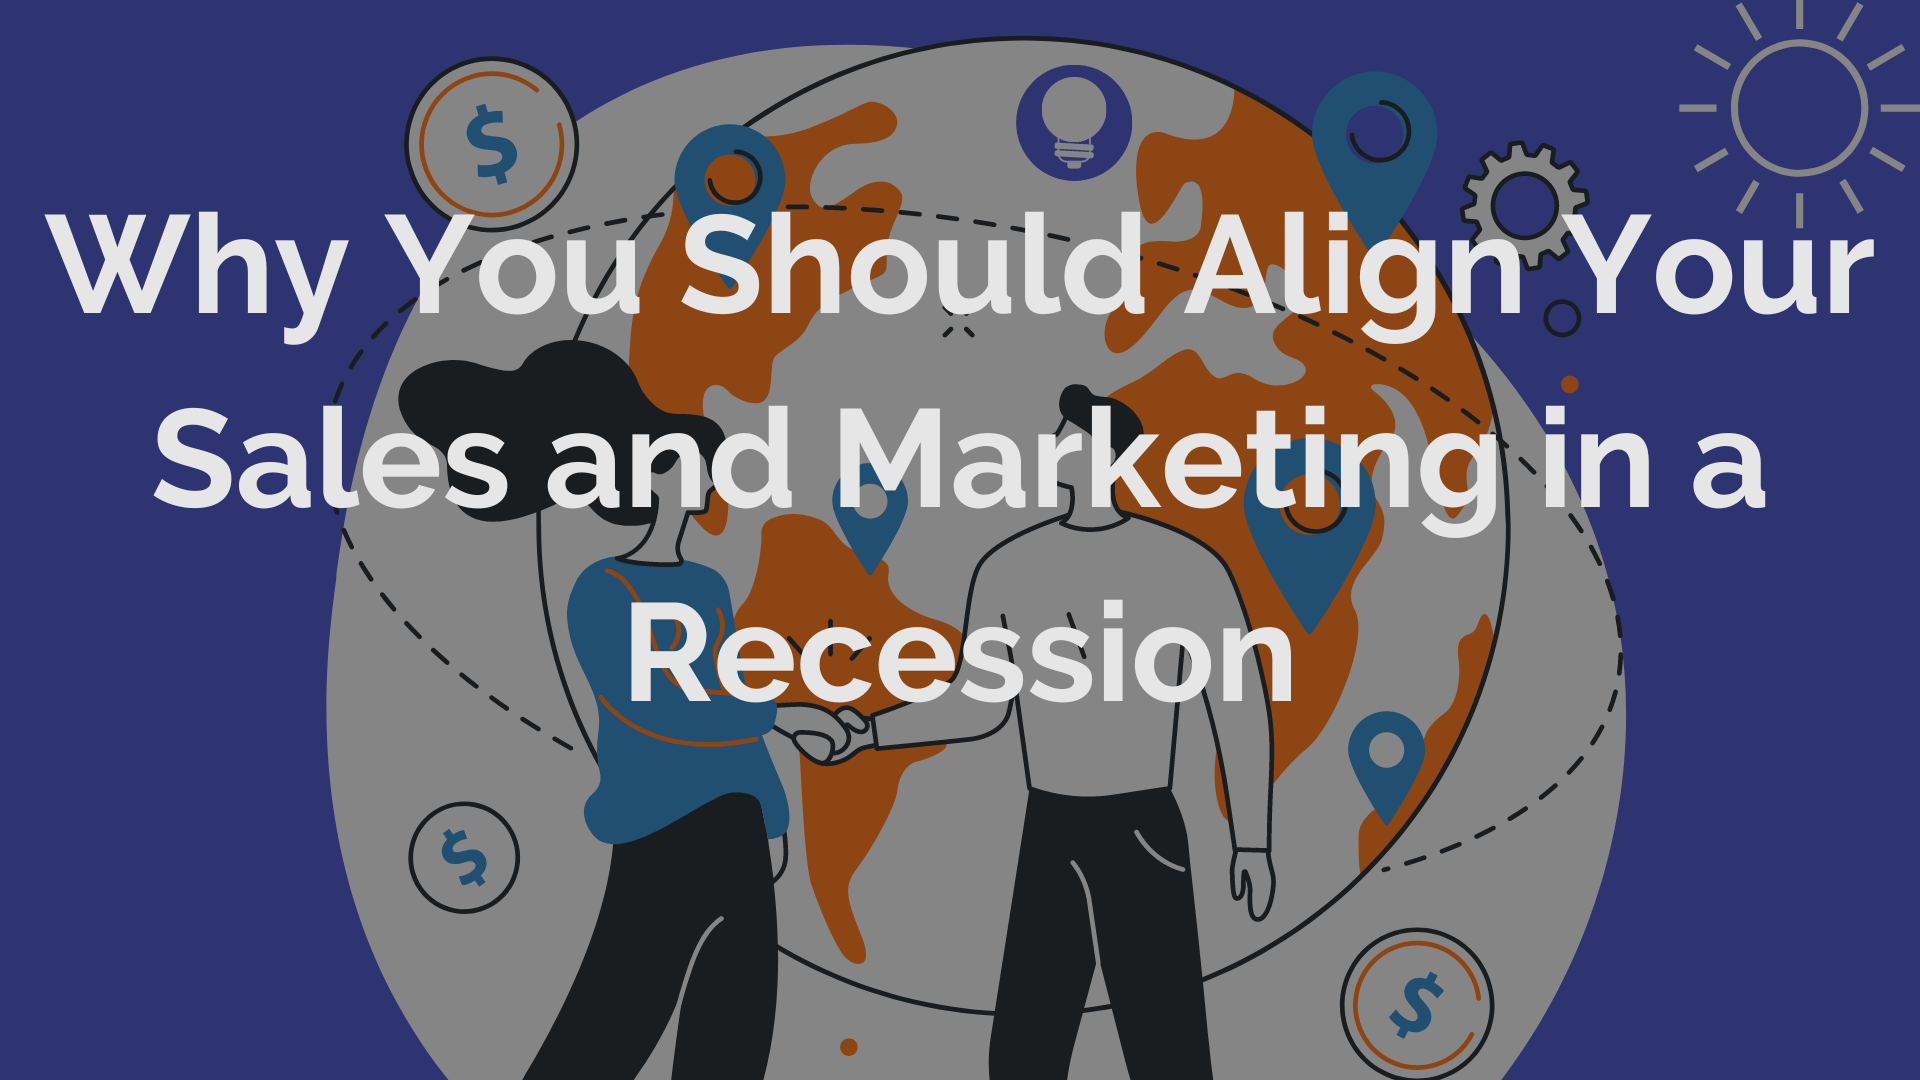 Why You Should Align Your Sales and Marketing in a Recession